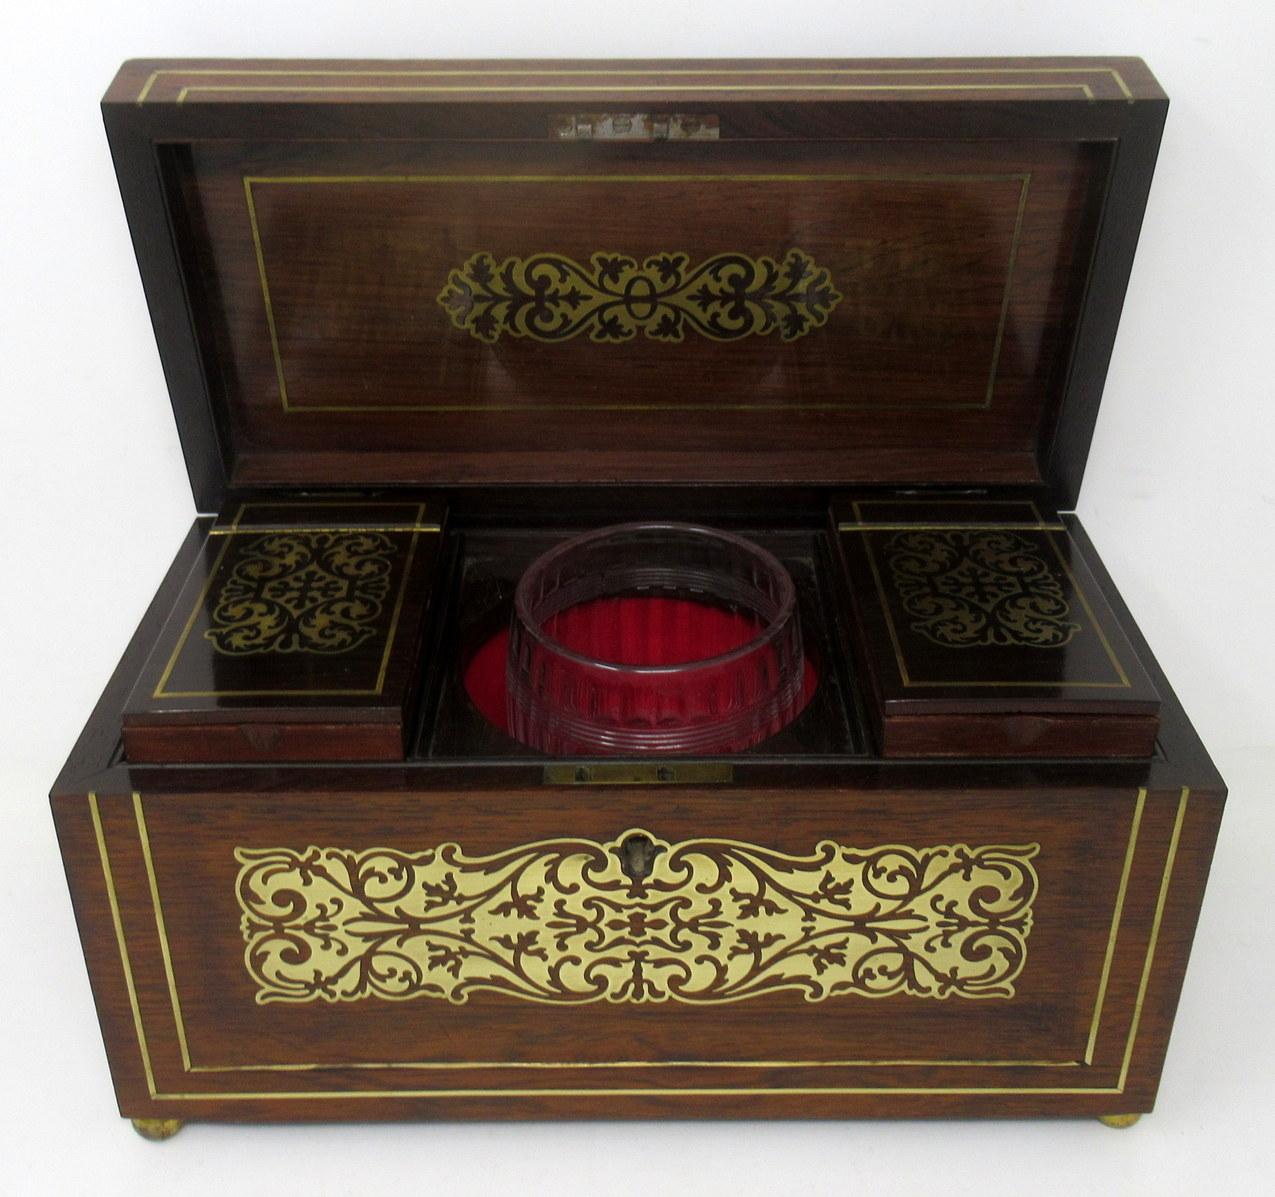 Polished Antique Brass Inlaid English Regency Mahogany Double Tea Caddy Box 19th Century For Sale